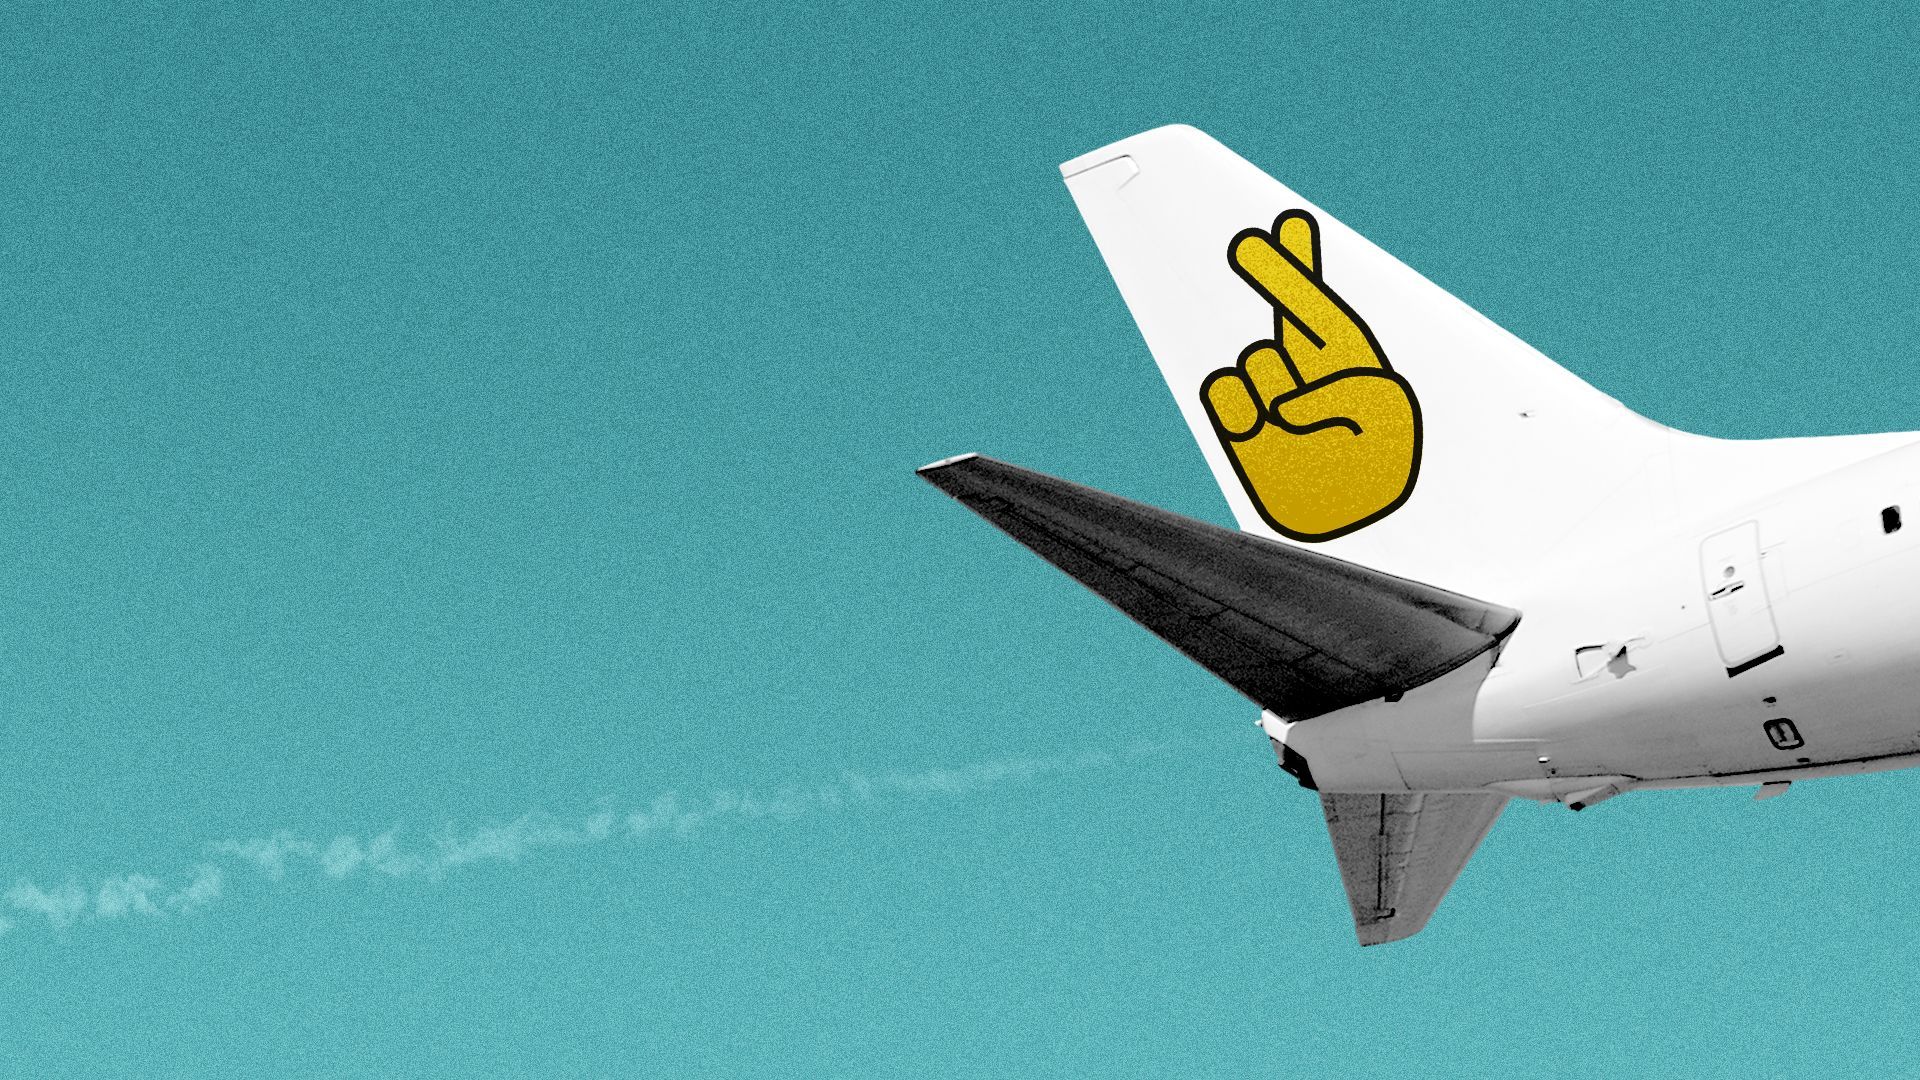 Illustration of a flying airplane with a fingers crossed emoji on the tail.